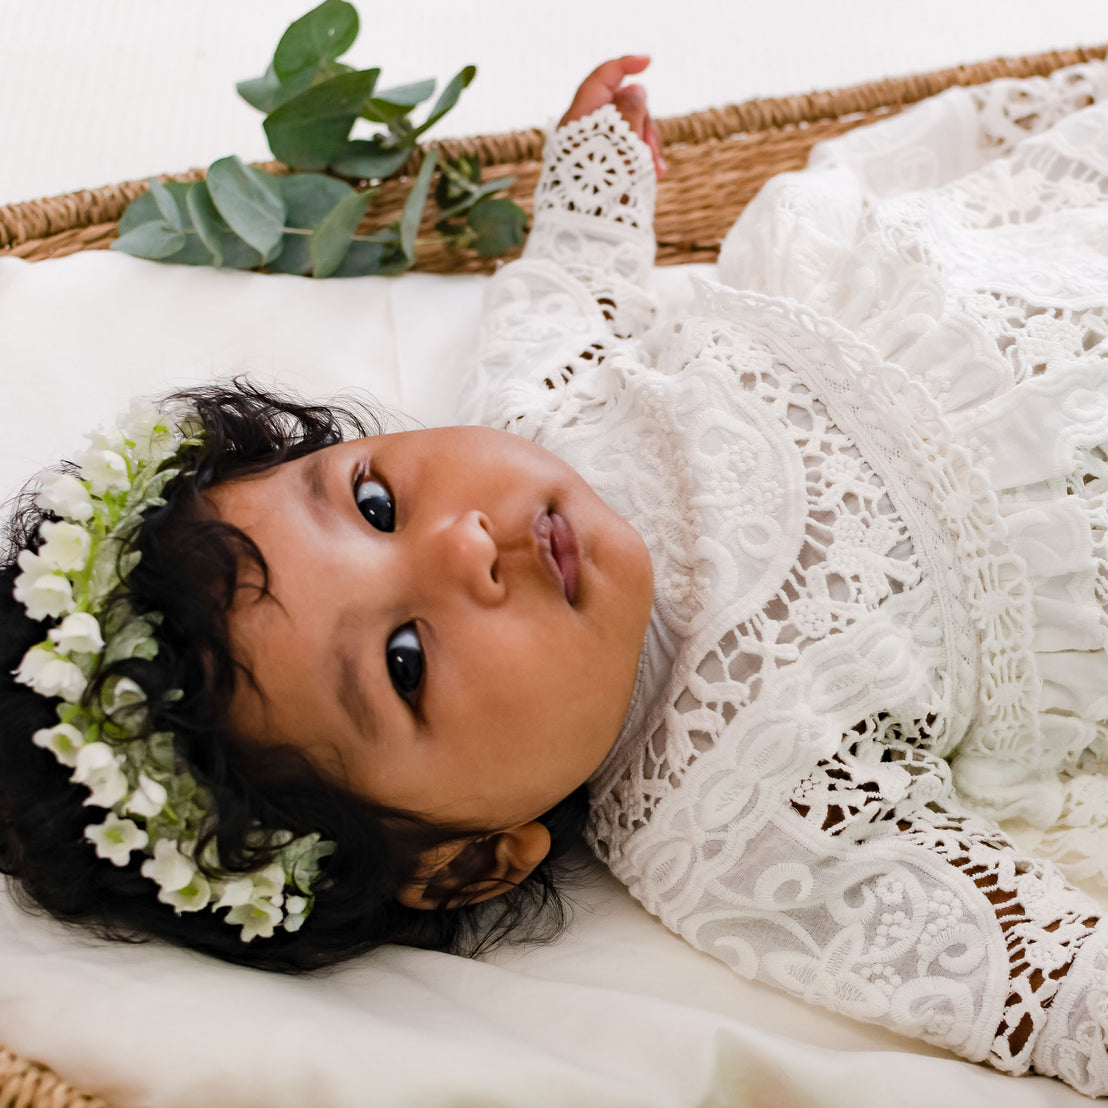 A baby with dark hair adorned in baby jewelry and wearing the Adeline Newborn Lace Dress and Bloomers complemented by a green and white floral crown lies in an upscale basket, looking up with a curious expression.